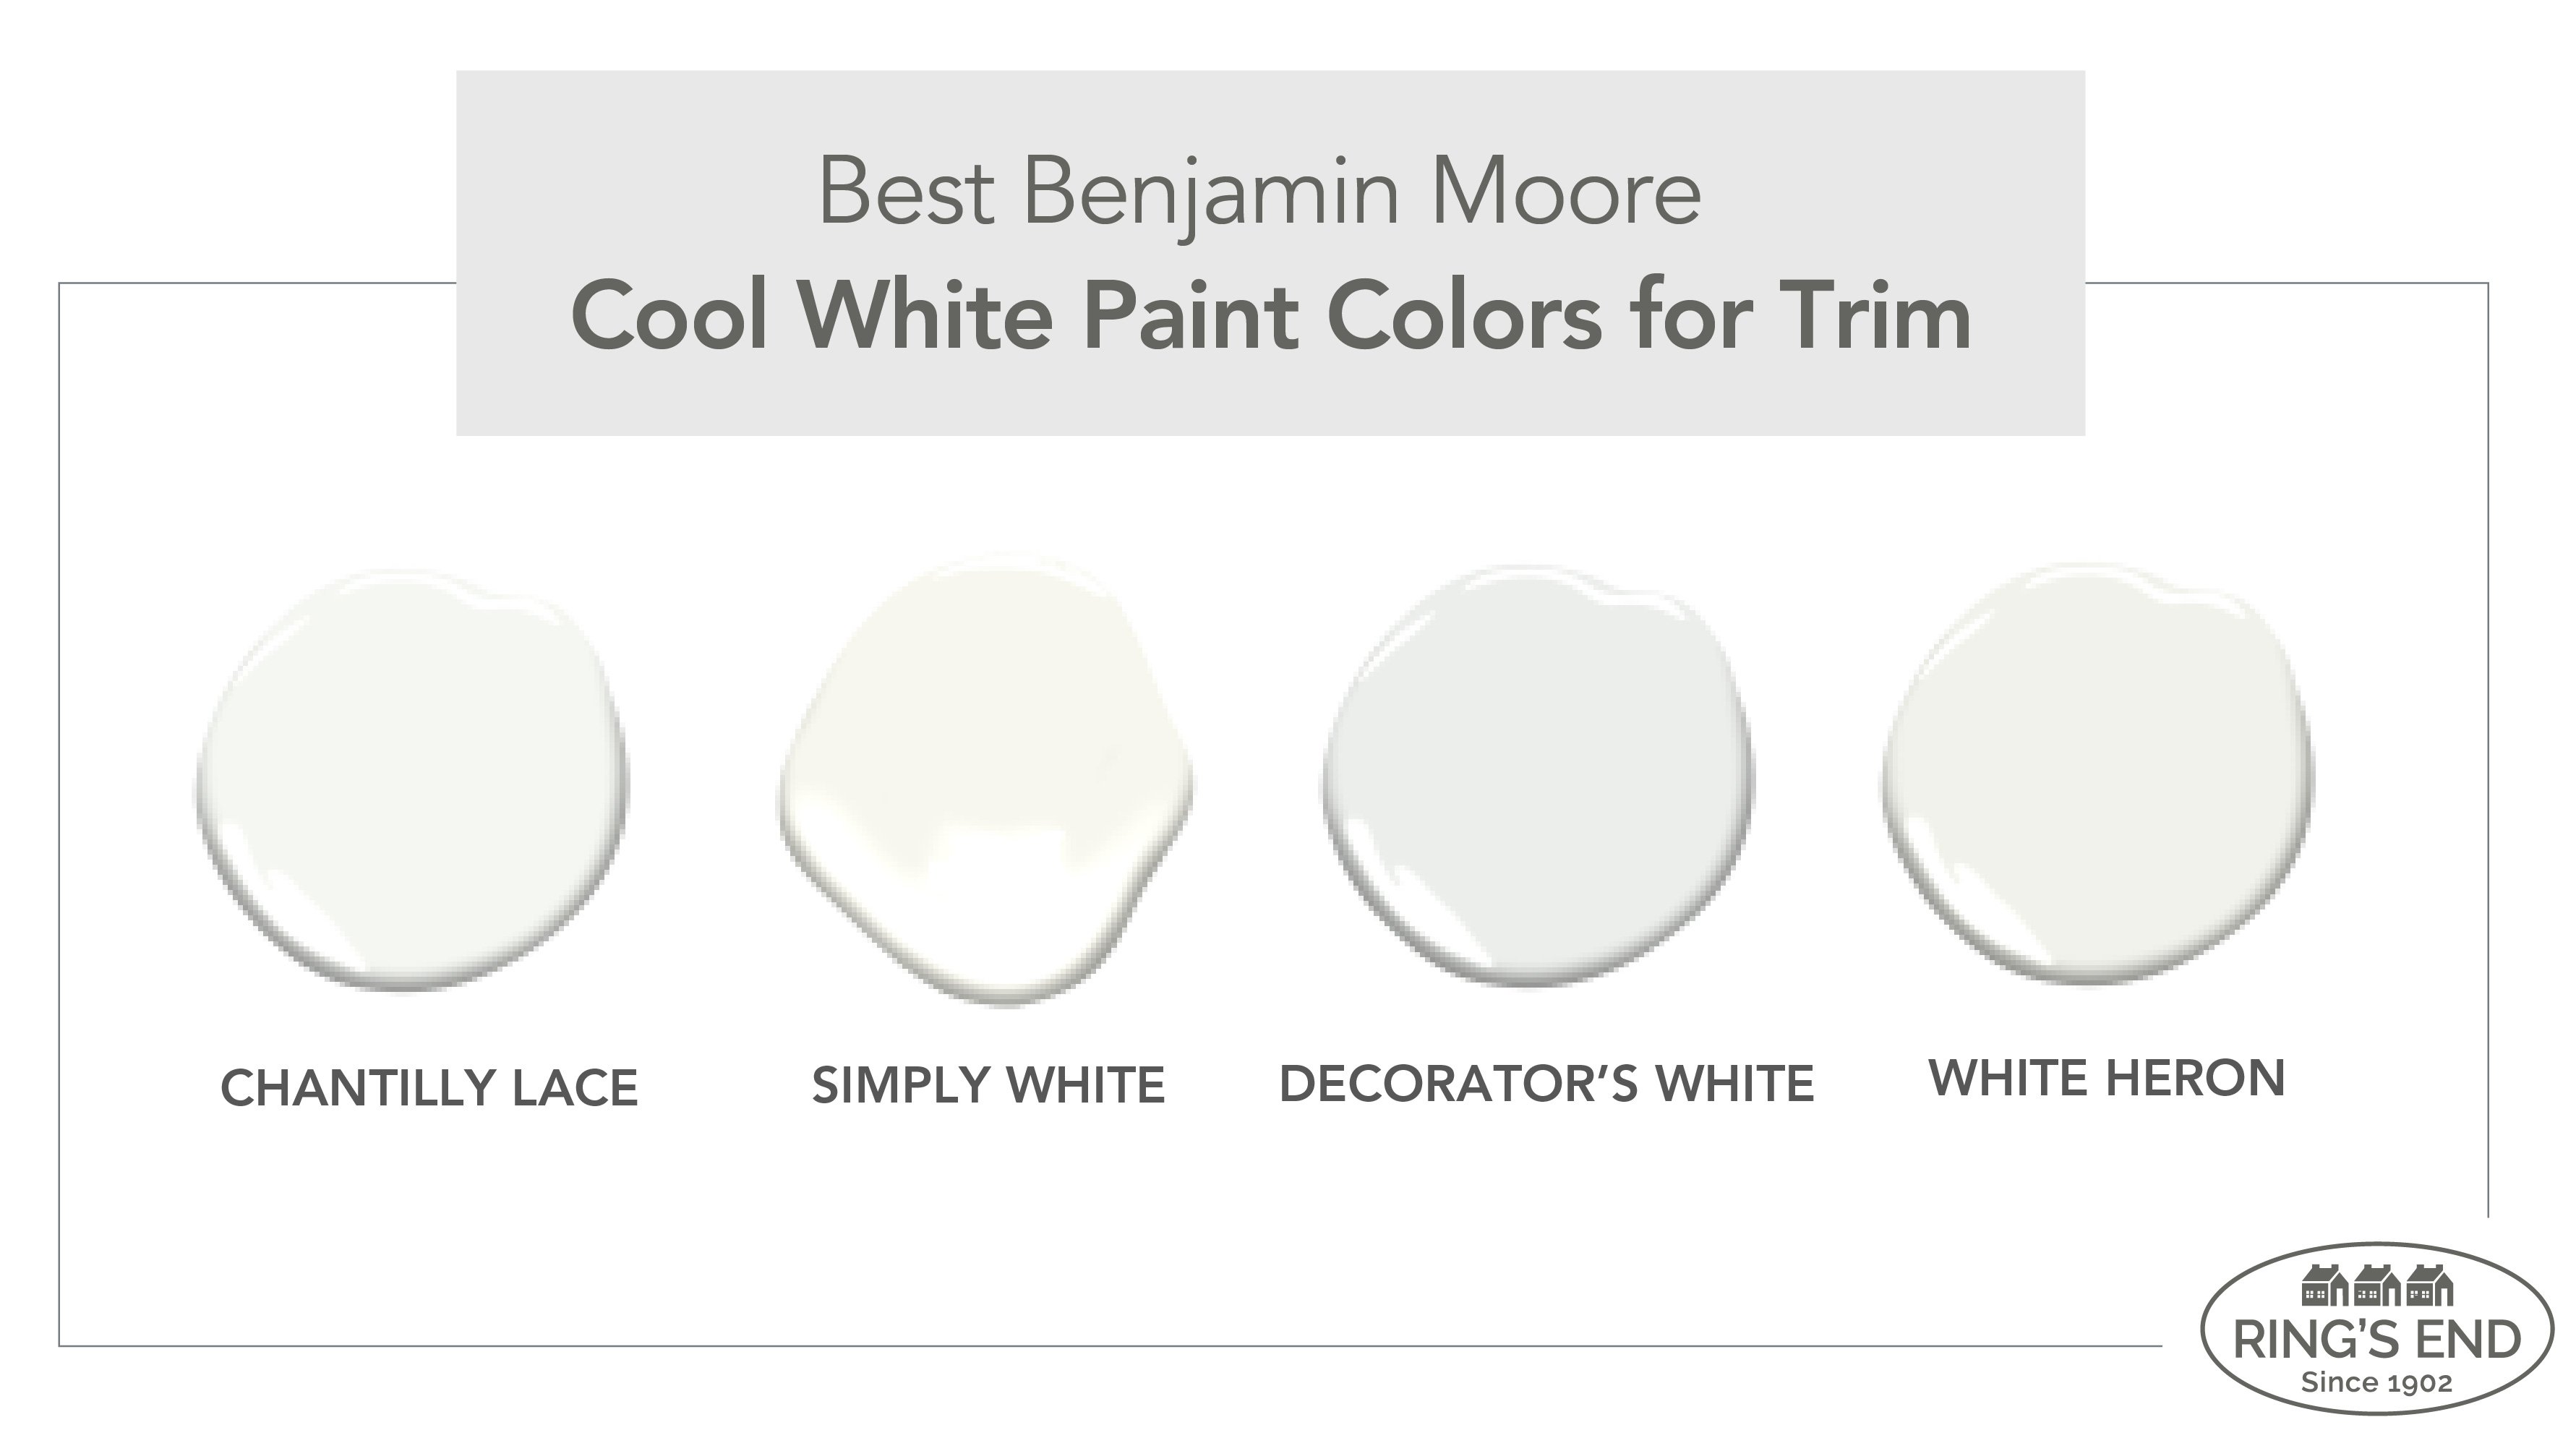 Best Benjamin Moore cool white paint colors for trim